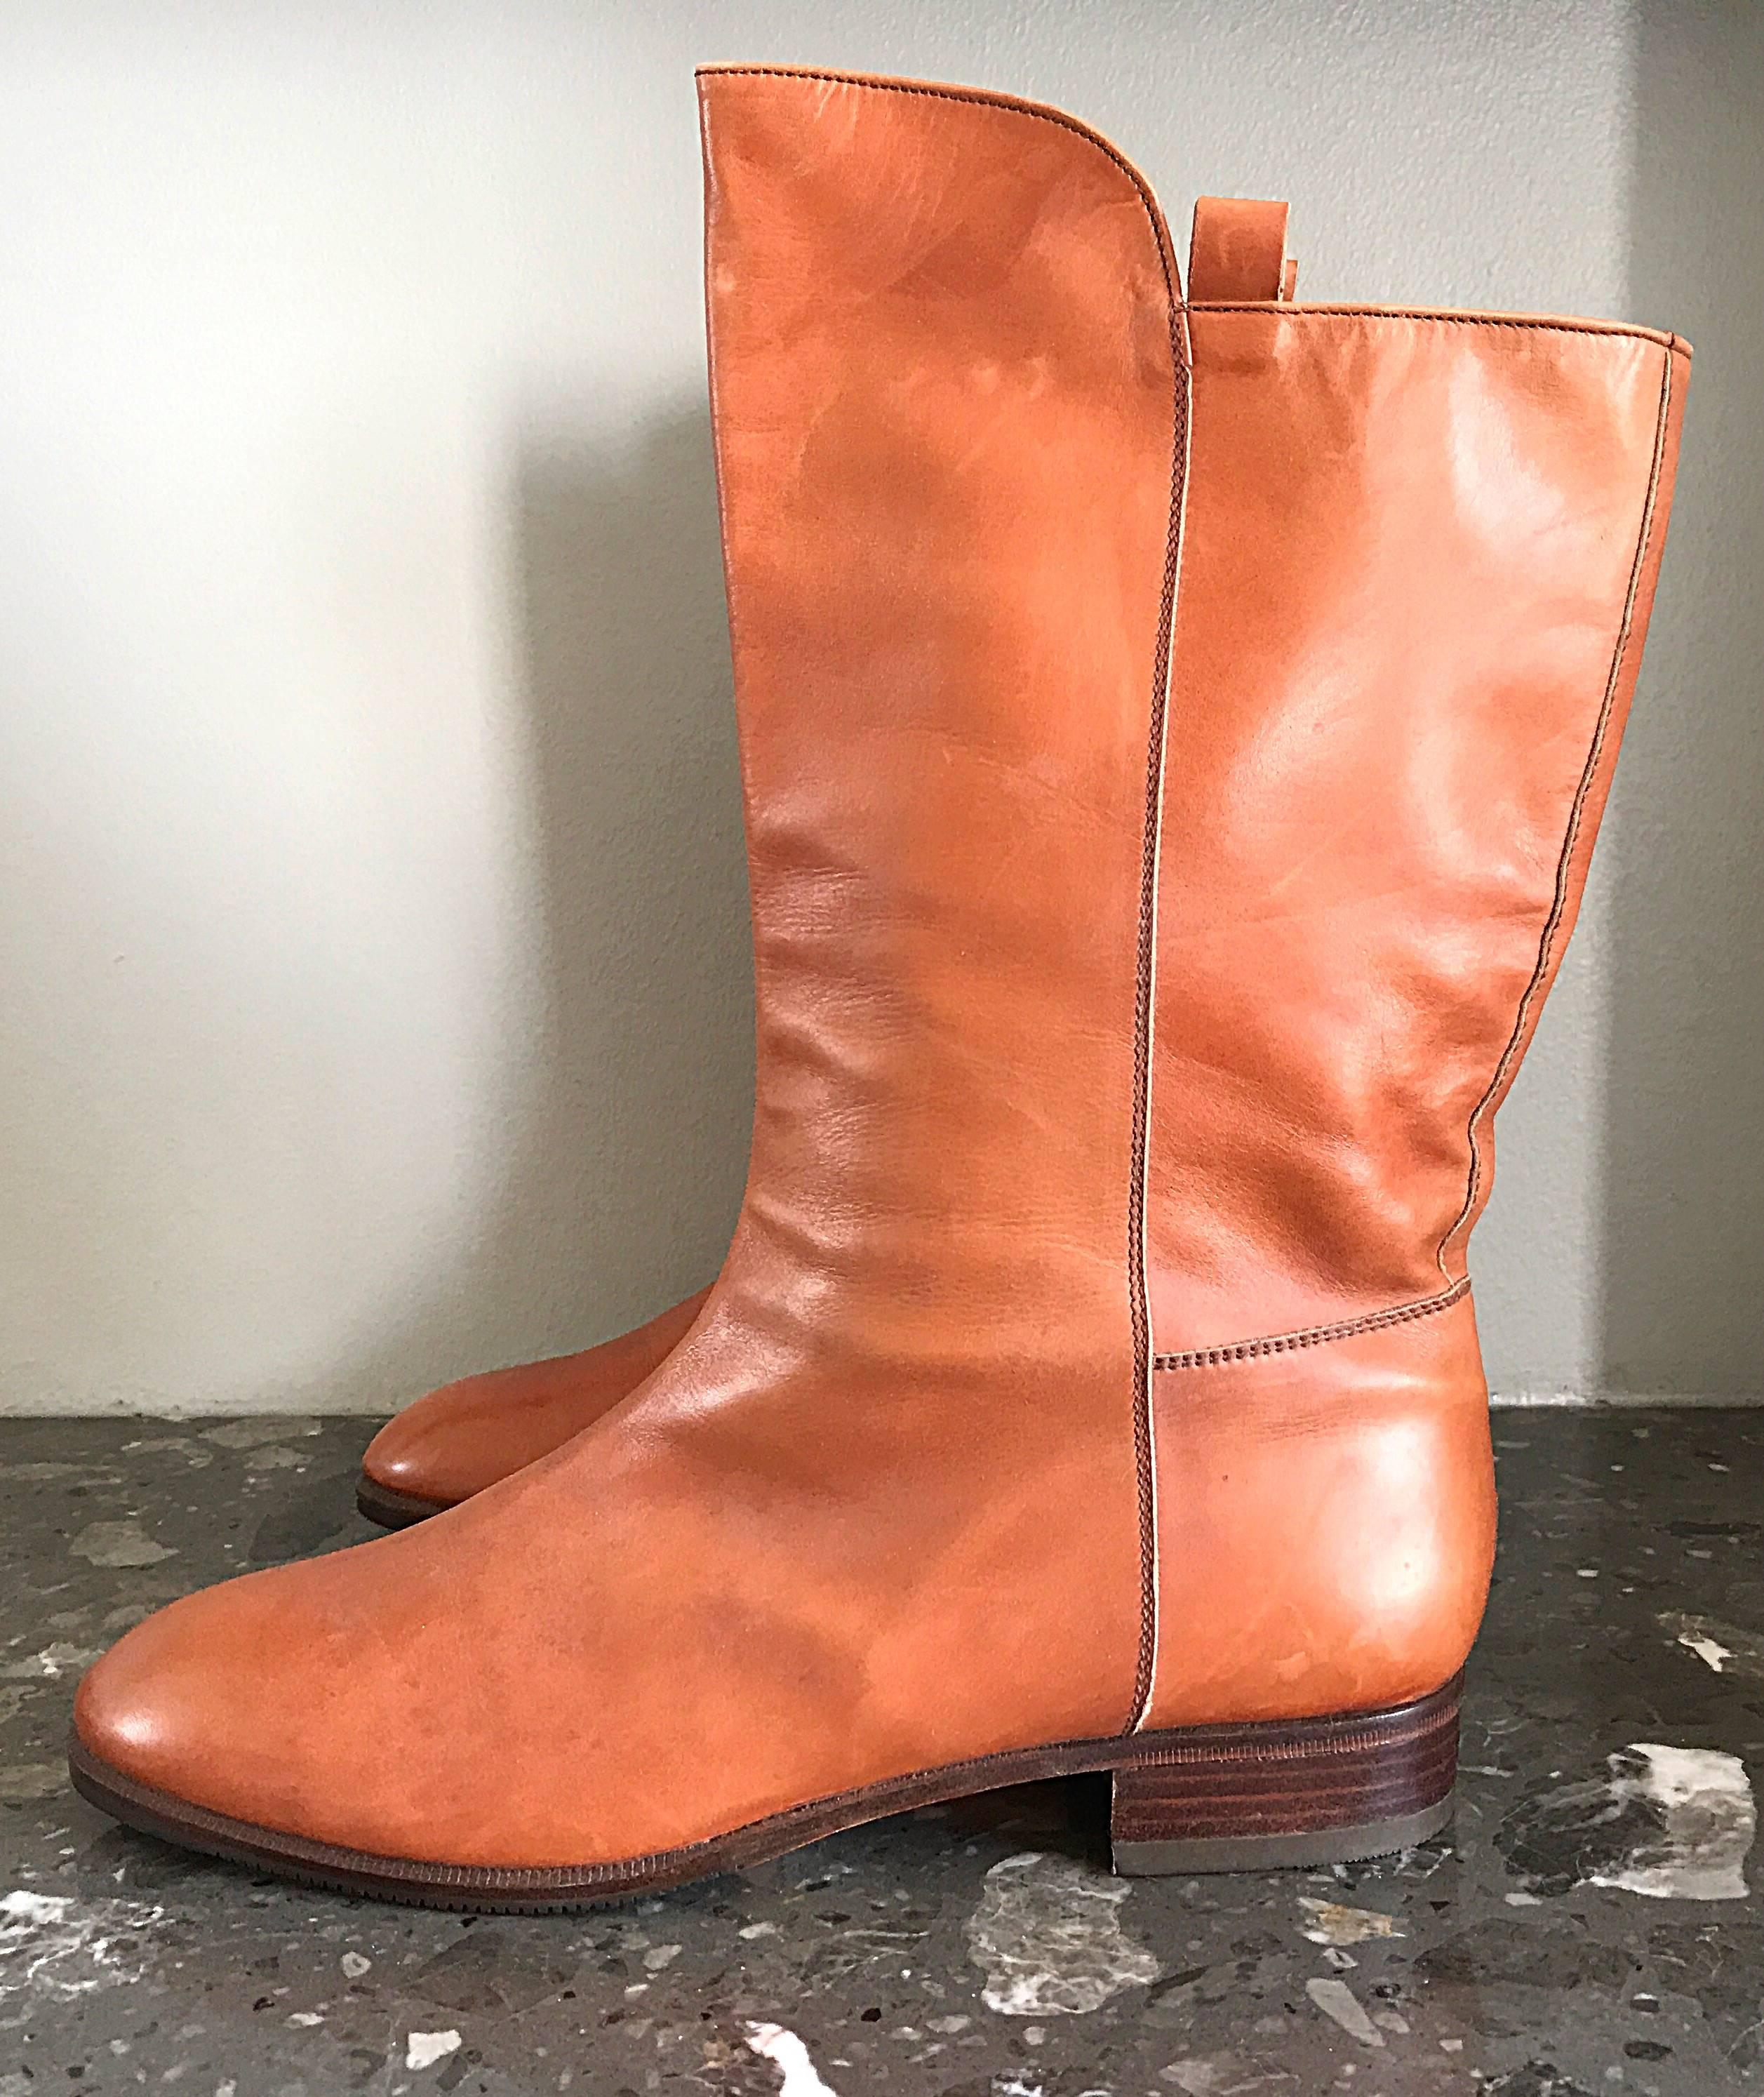 New 1980 Perry Ellis Size 6 Tan Saddle Leather Deadstock Calf Booties Boots Neuf - En vente à San Diego, CA